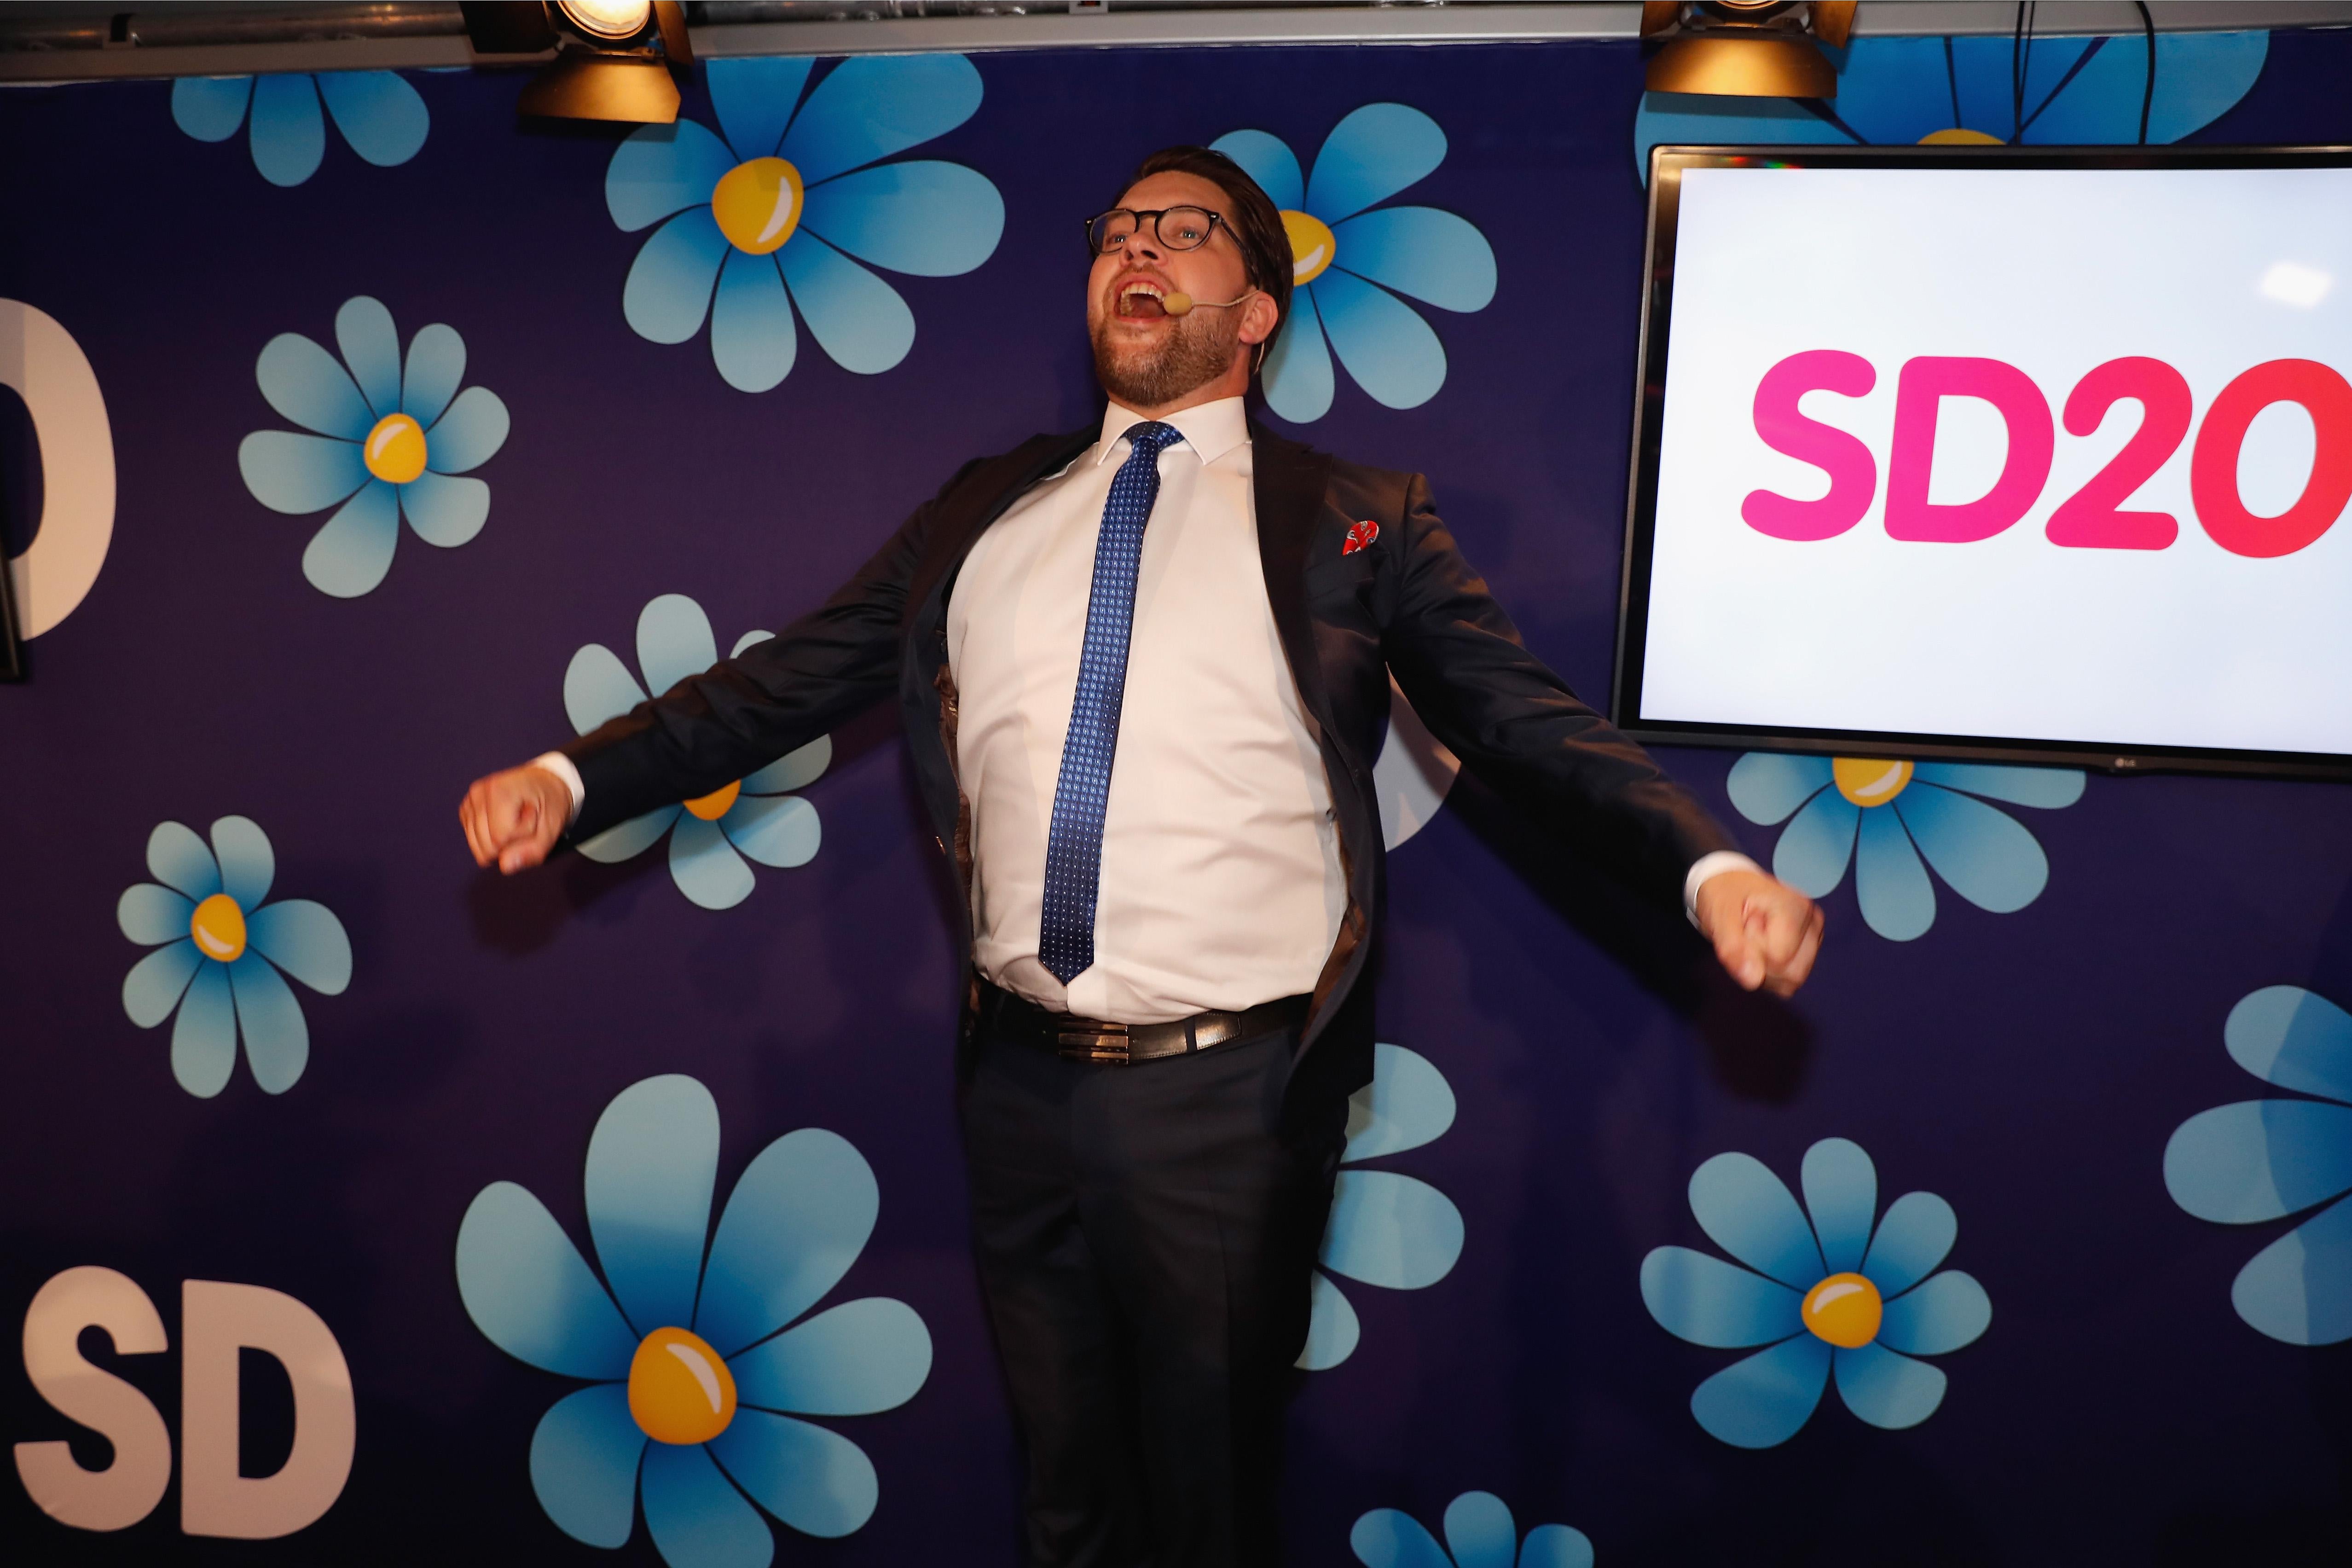 STOCKHOLM, SWEDEN - SEPTEMBER 09: Leader of the far-right Sweden Democrats Jimmy Akesson speaks to members and supporters at the party election center on September 9, 2018 in Stockholm, Sweden. Swedes have headed to the polls in a tightly contested general election where immigration has been a central issue of a heated campaign and which could see the far-right Sweden Democrats make significant gains. (Photo by Michael Campanella/Getty Images)